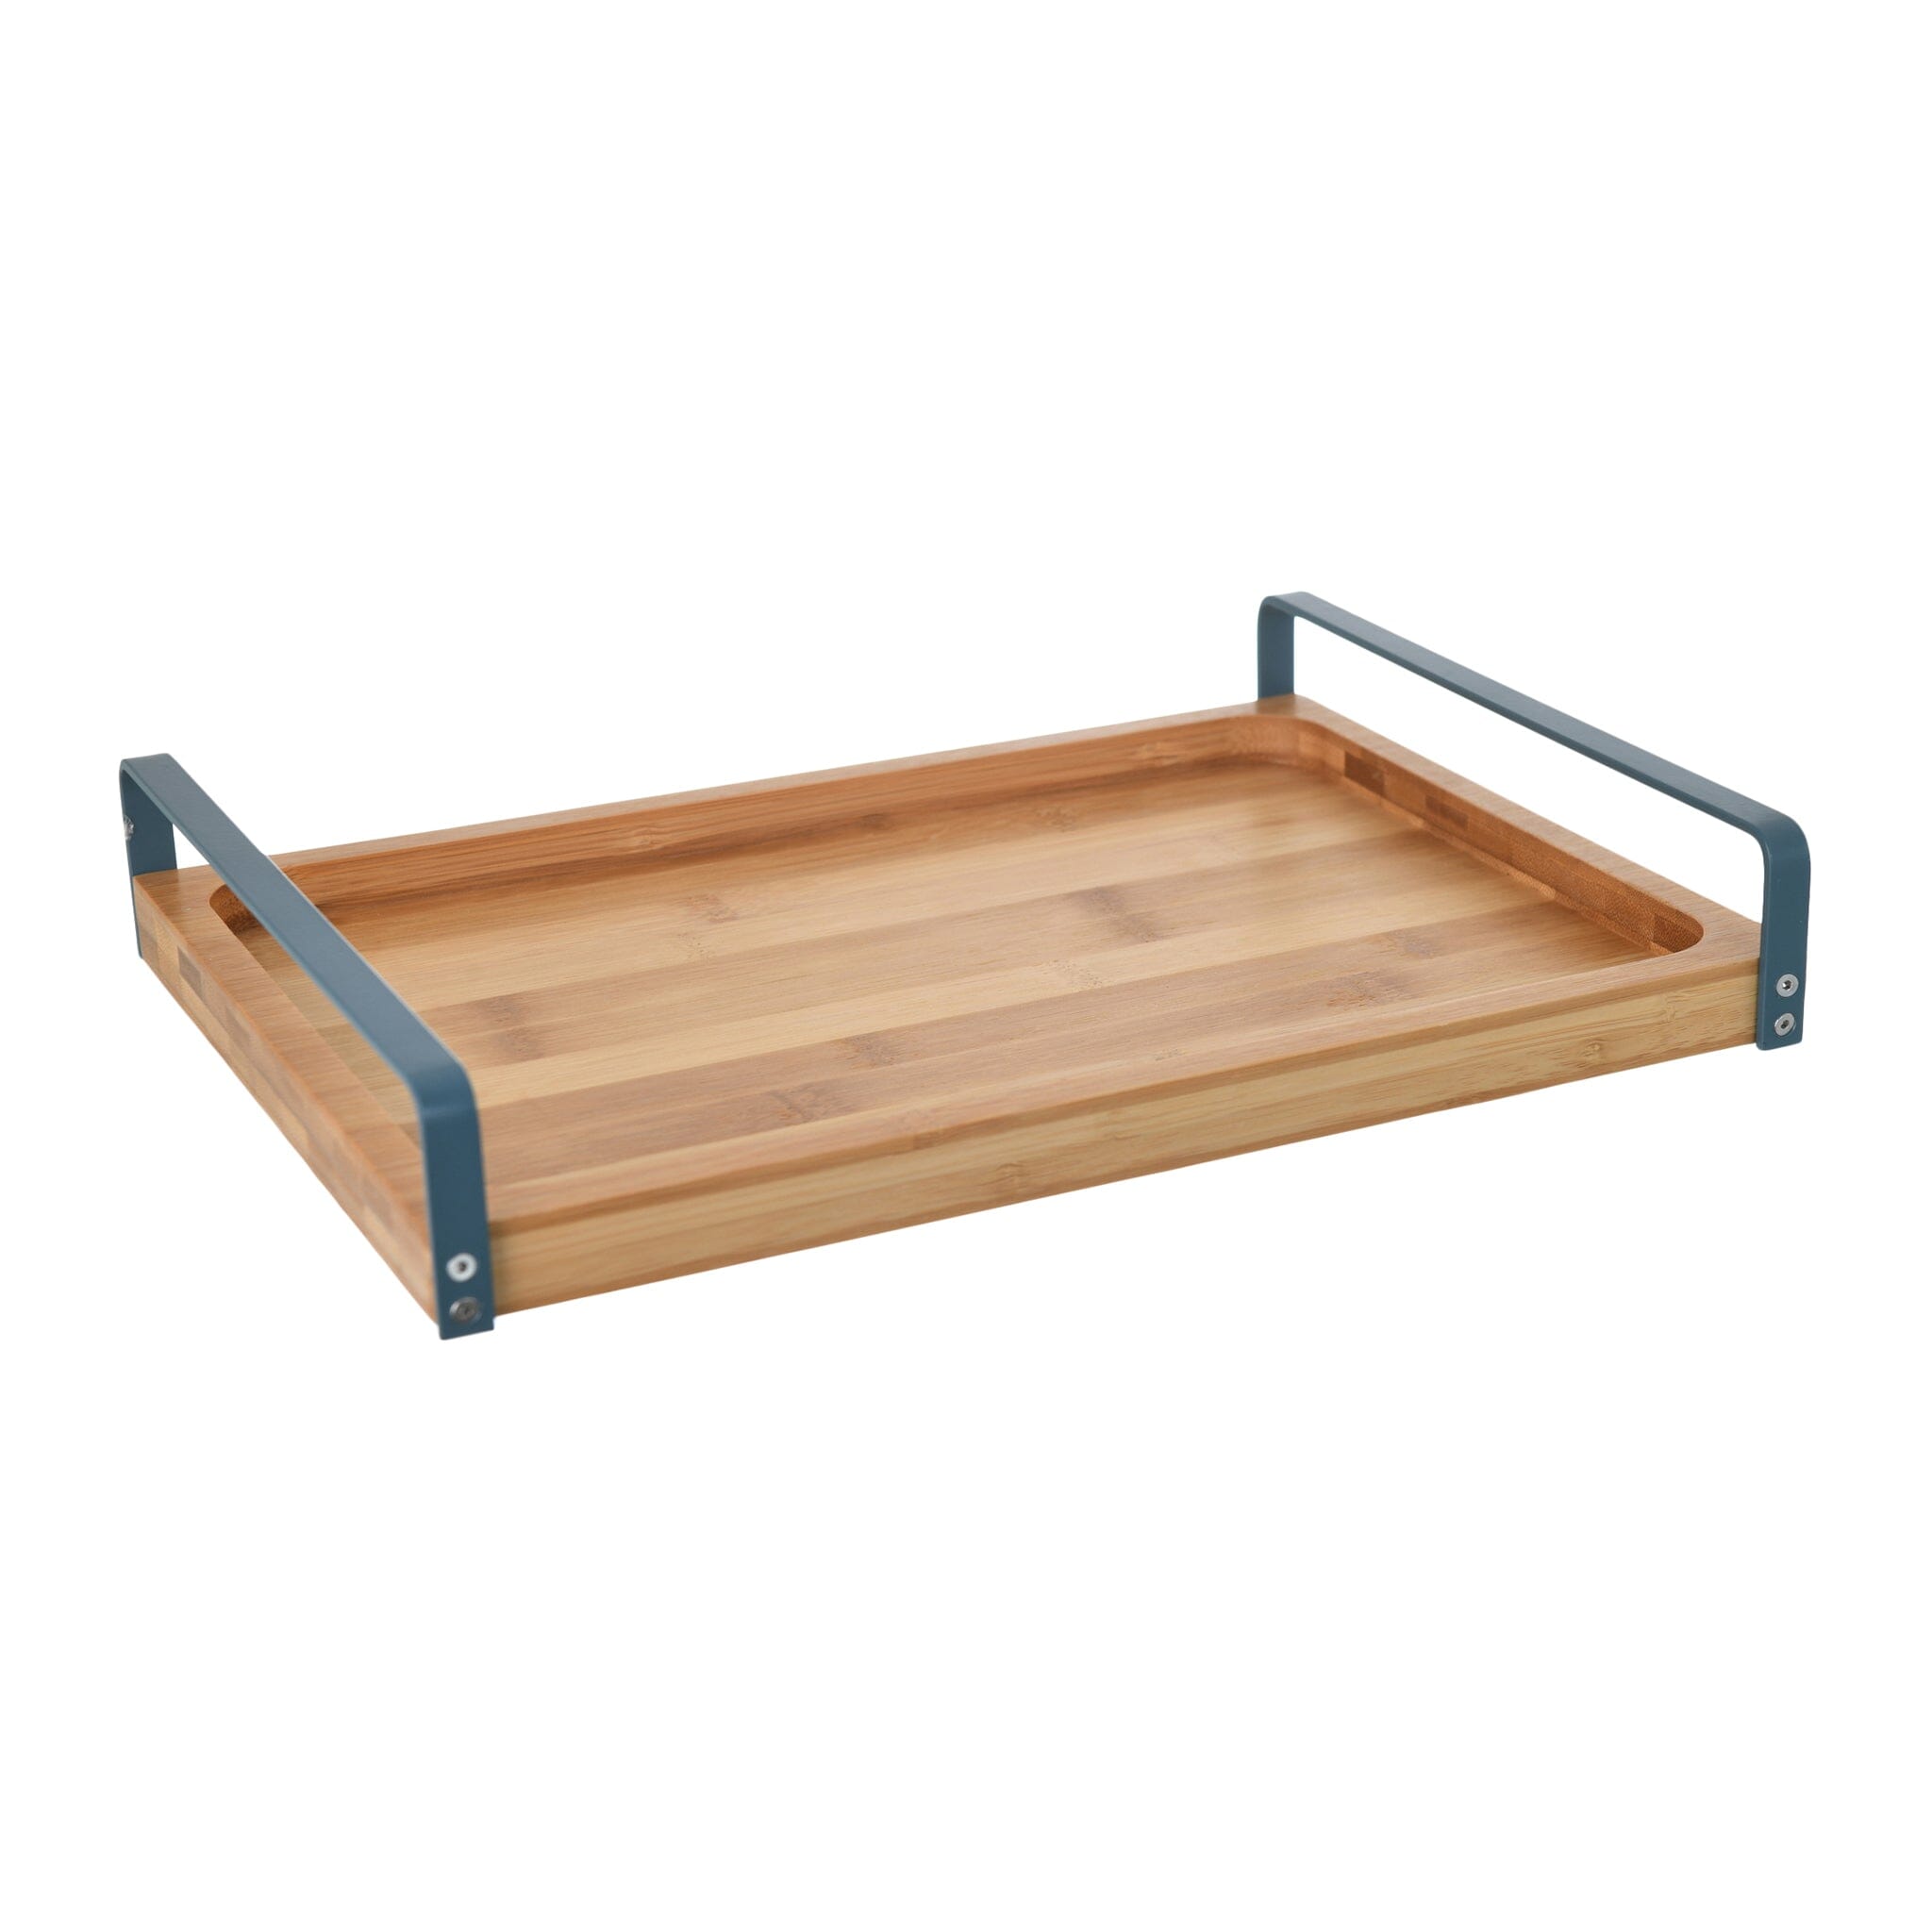 O'lala - Rectangular Wooden Tray With Metal Handle - Petroleum Blue - 24x34cm - 520008170